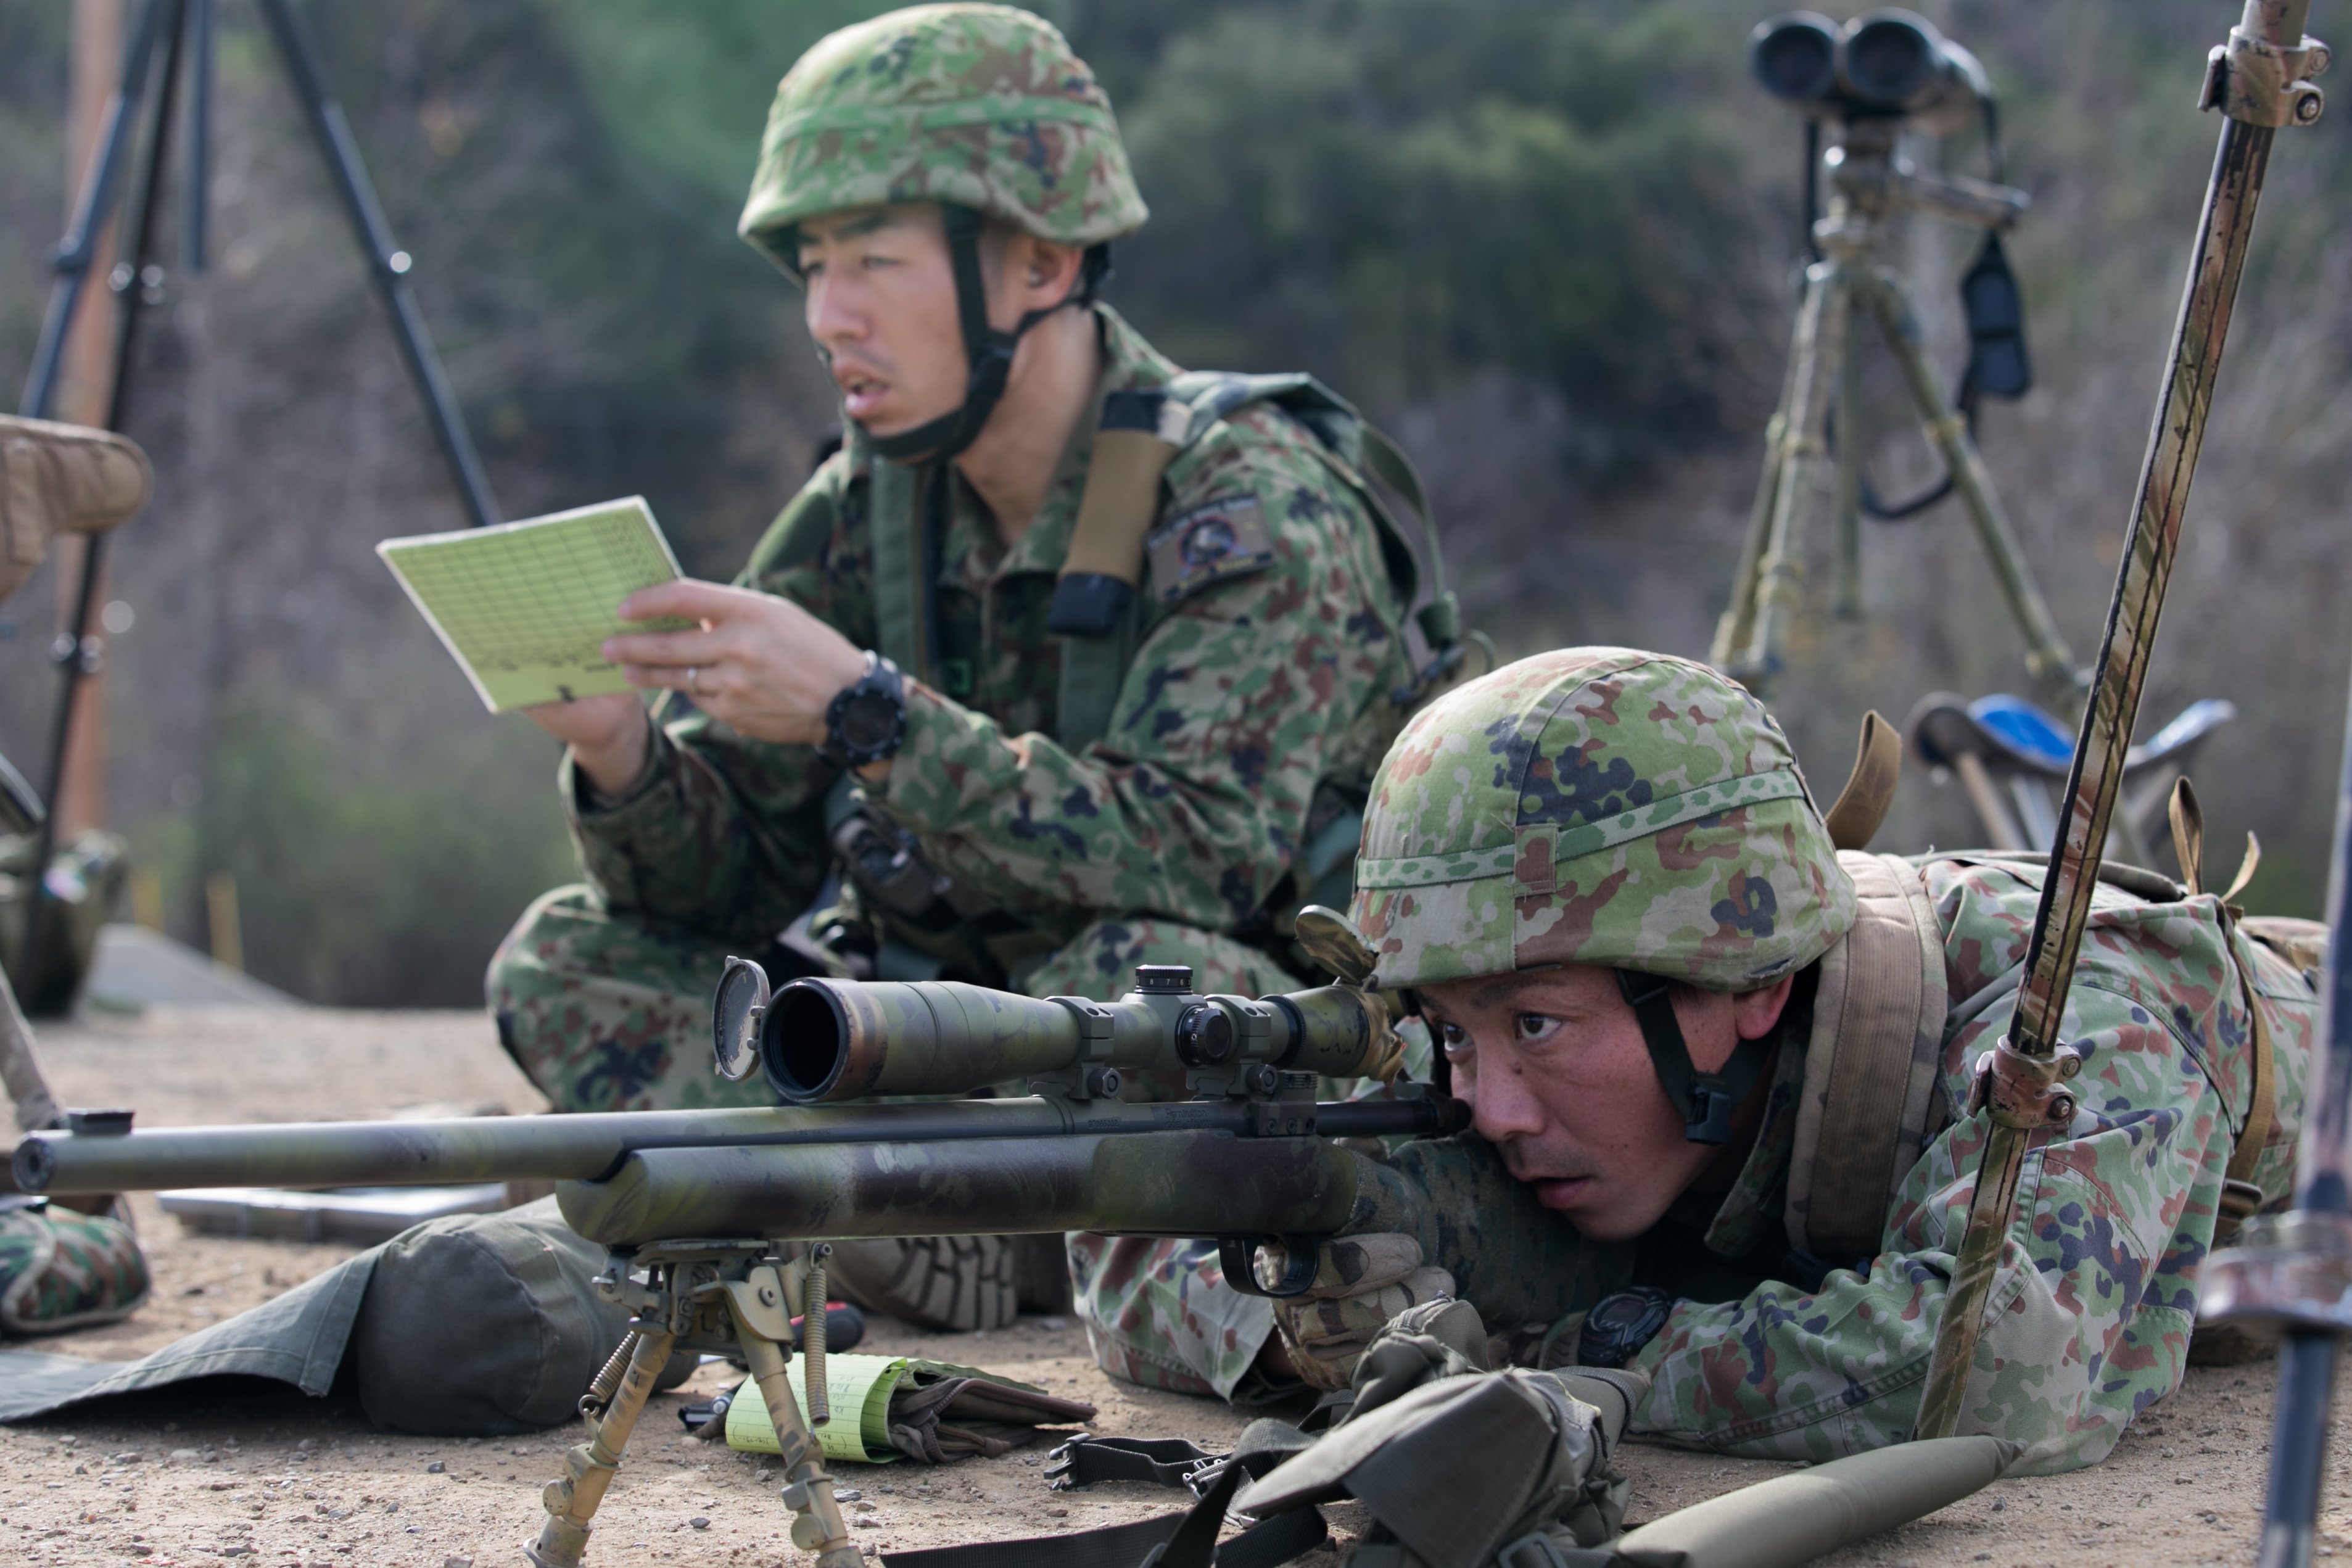 Japan Ground Self-Defense Force (JGSDF) soldiers measure range distances with their M24 sniper rifles at the unknown distance live-fire event during Exercise Iron Fist 2016 aboard Marine Corps Base Camp Pendleton, Calif. US Marine Corps Photo